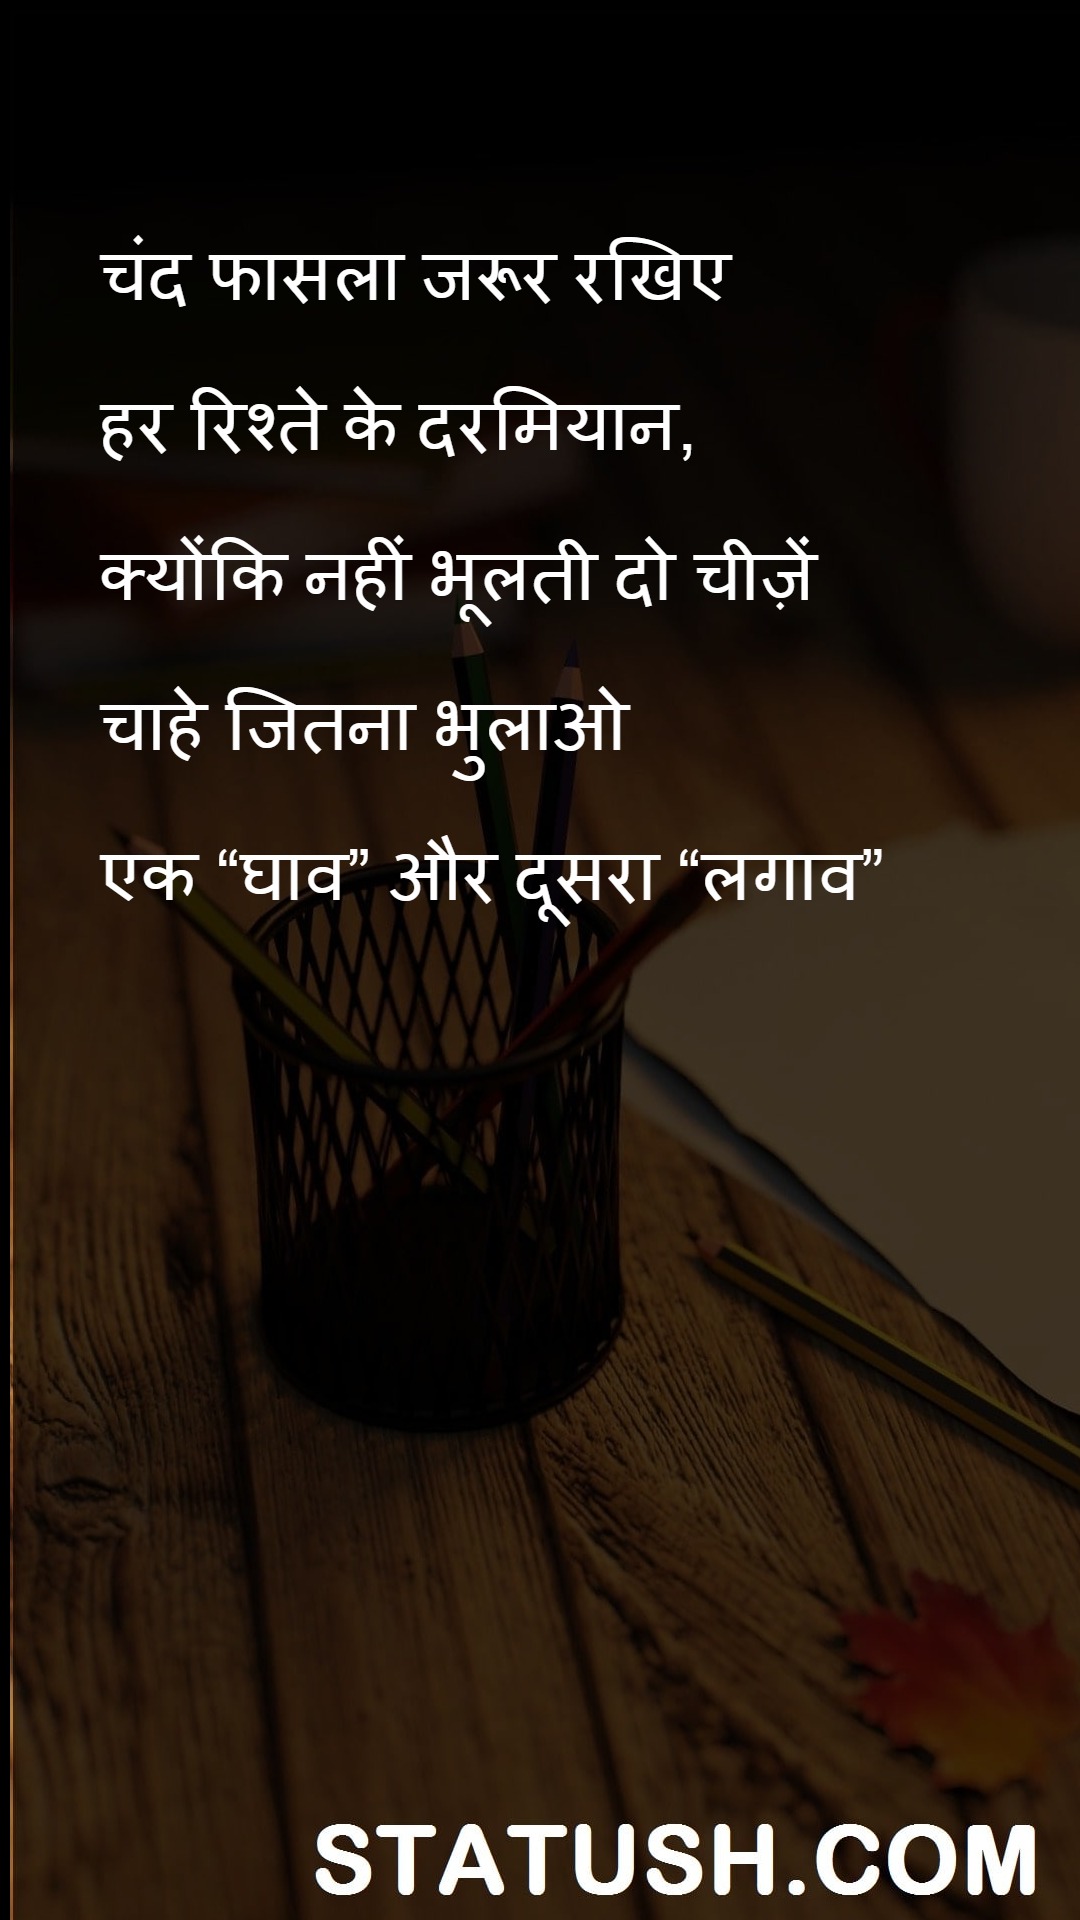 Be sure to keep a few distance between - Hindi Quotes at statush.com